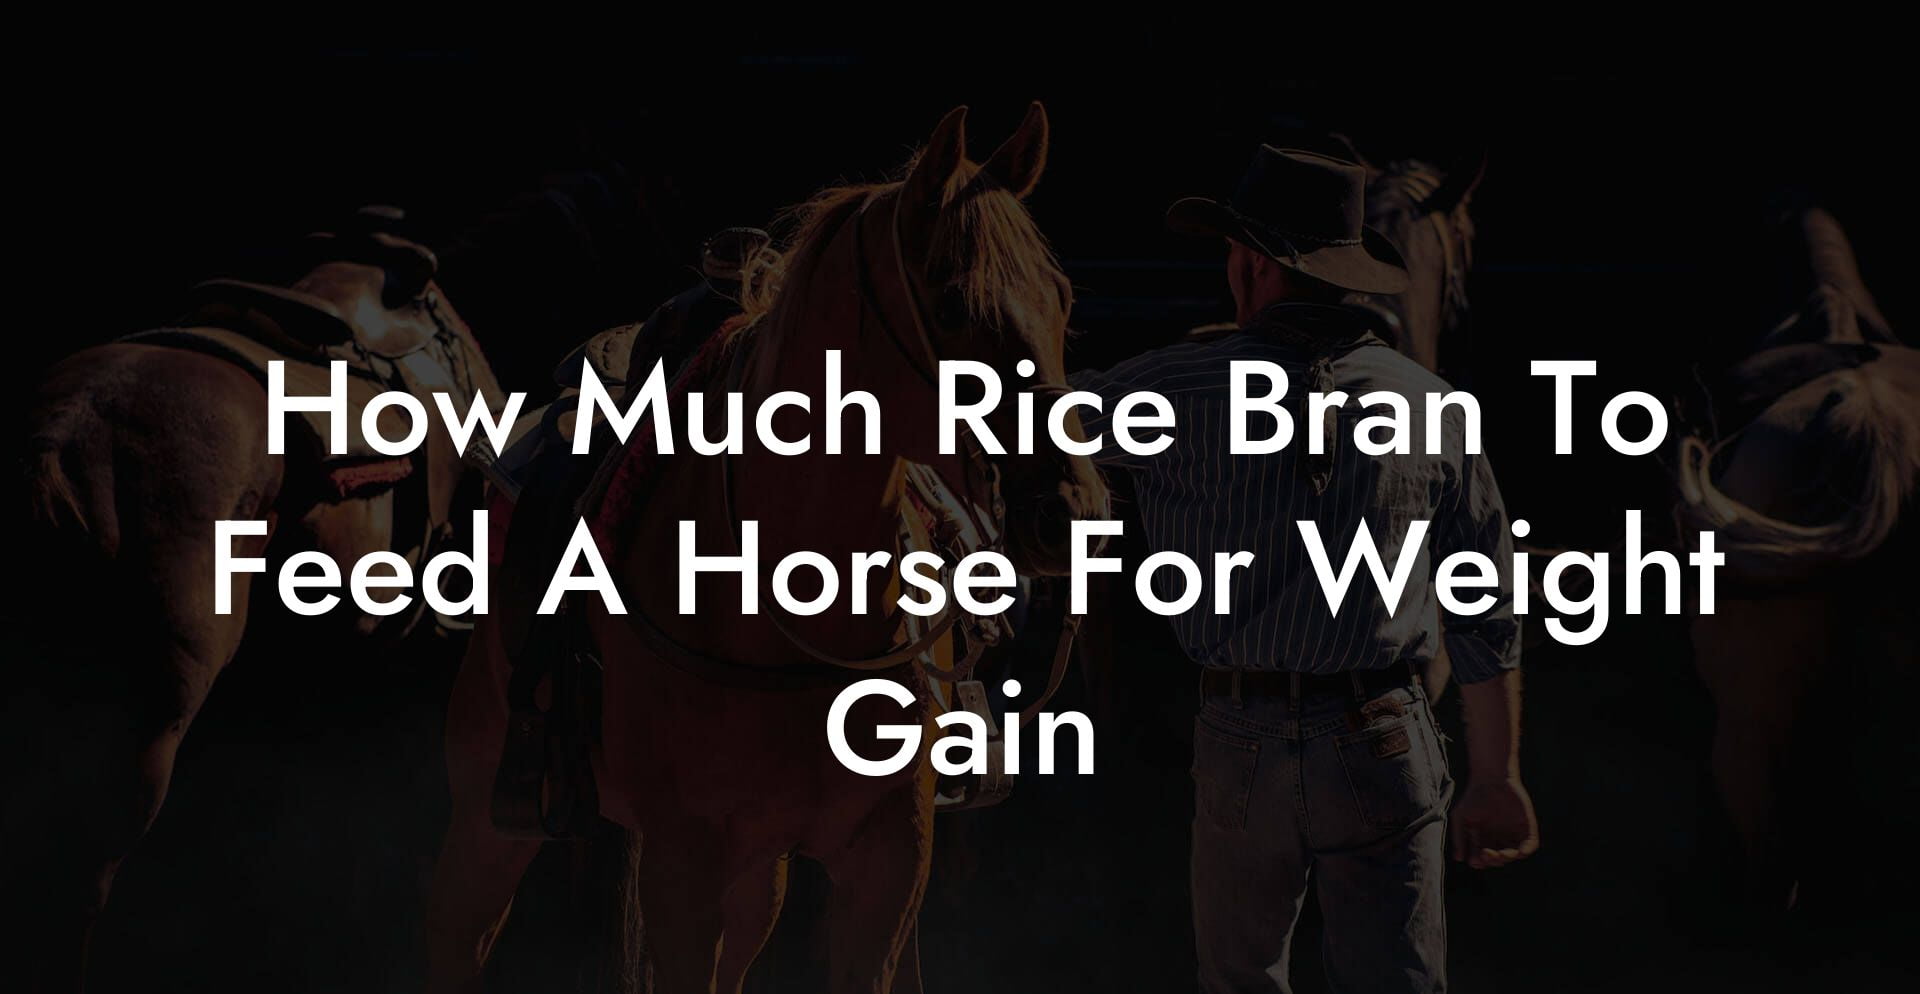 How Much Rice Bran To Feed A Horse For Weight Gain